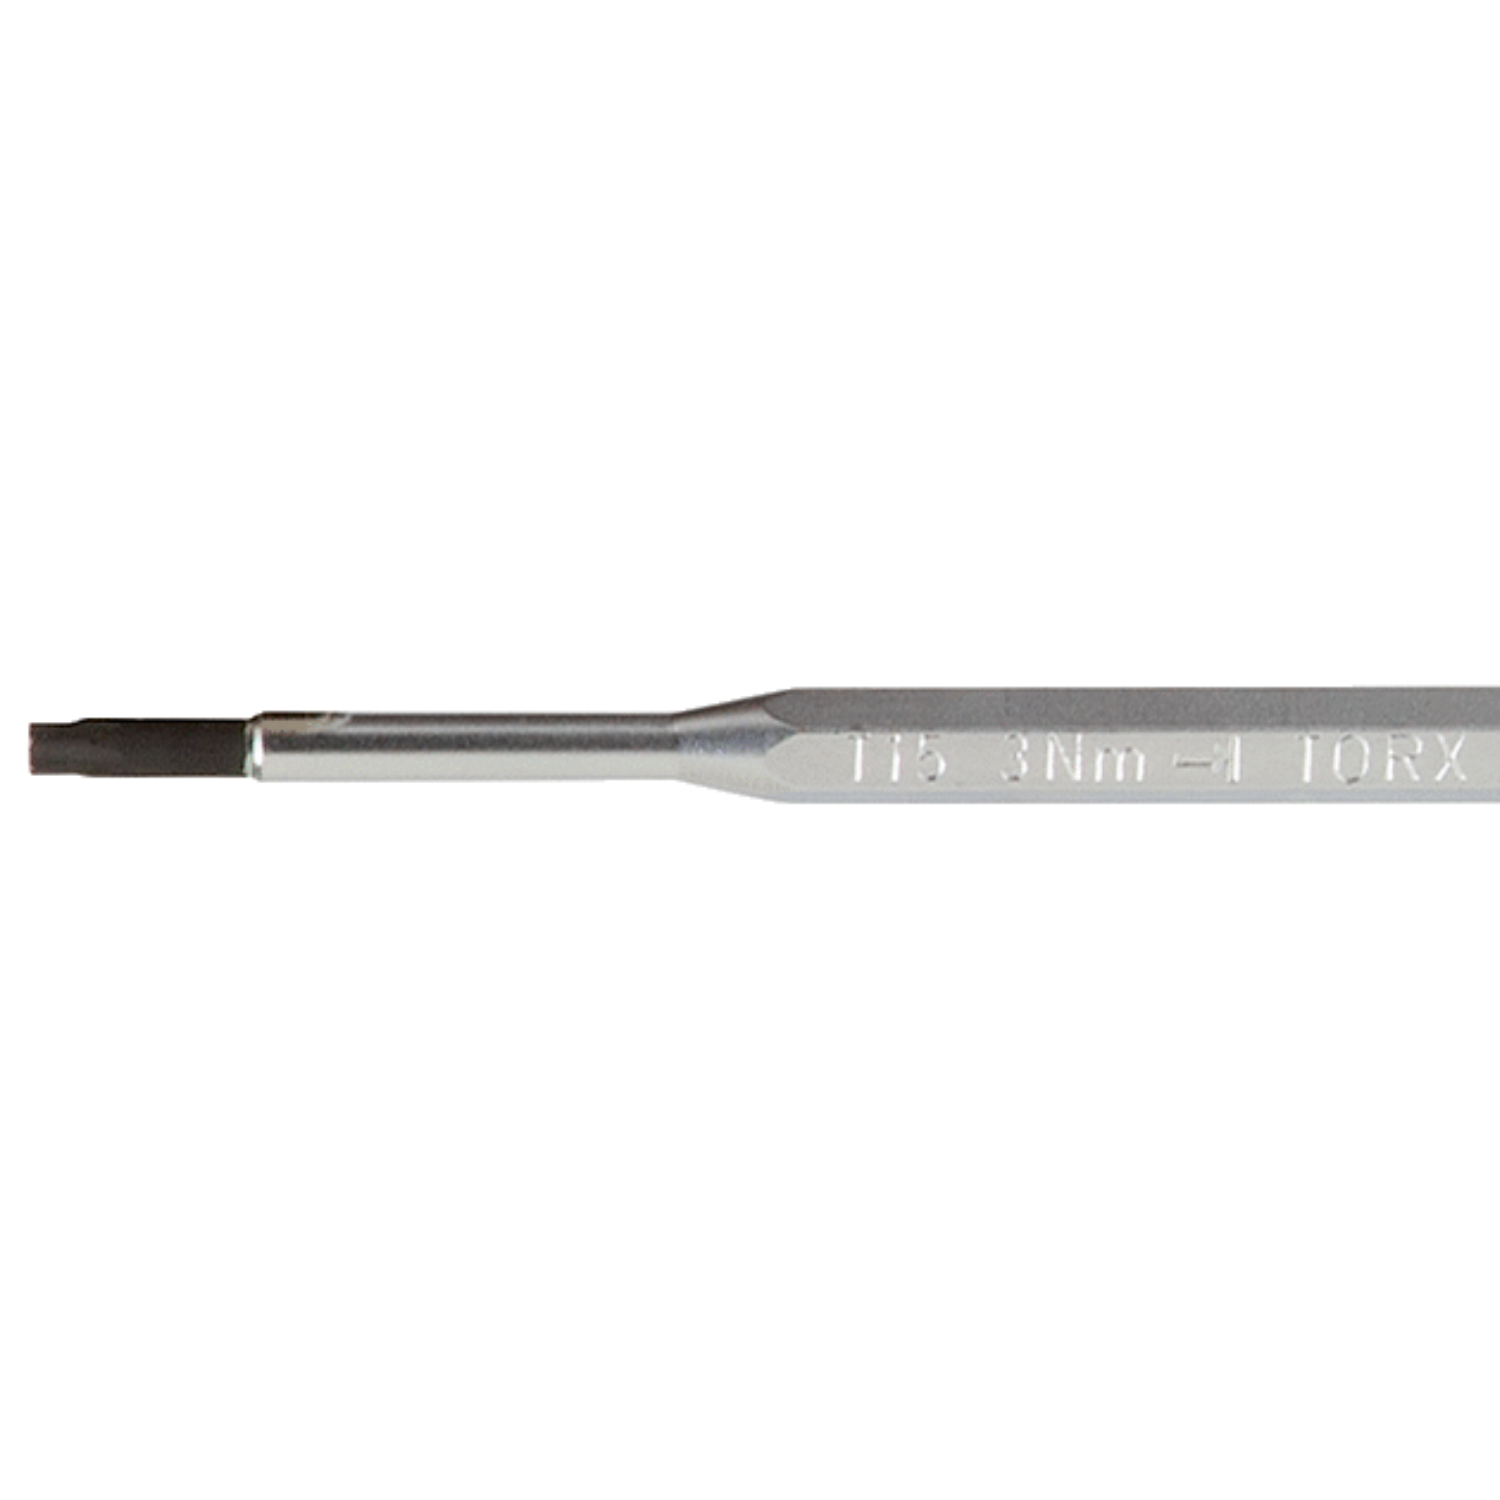 BAHCO BE 6990TX KL Torque Screwdriver Blades with TORX Tip - Premium Torque Screwdriver from BAHCO - Shop now at Yew Aik.